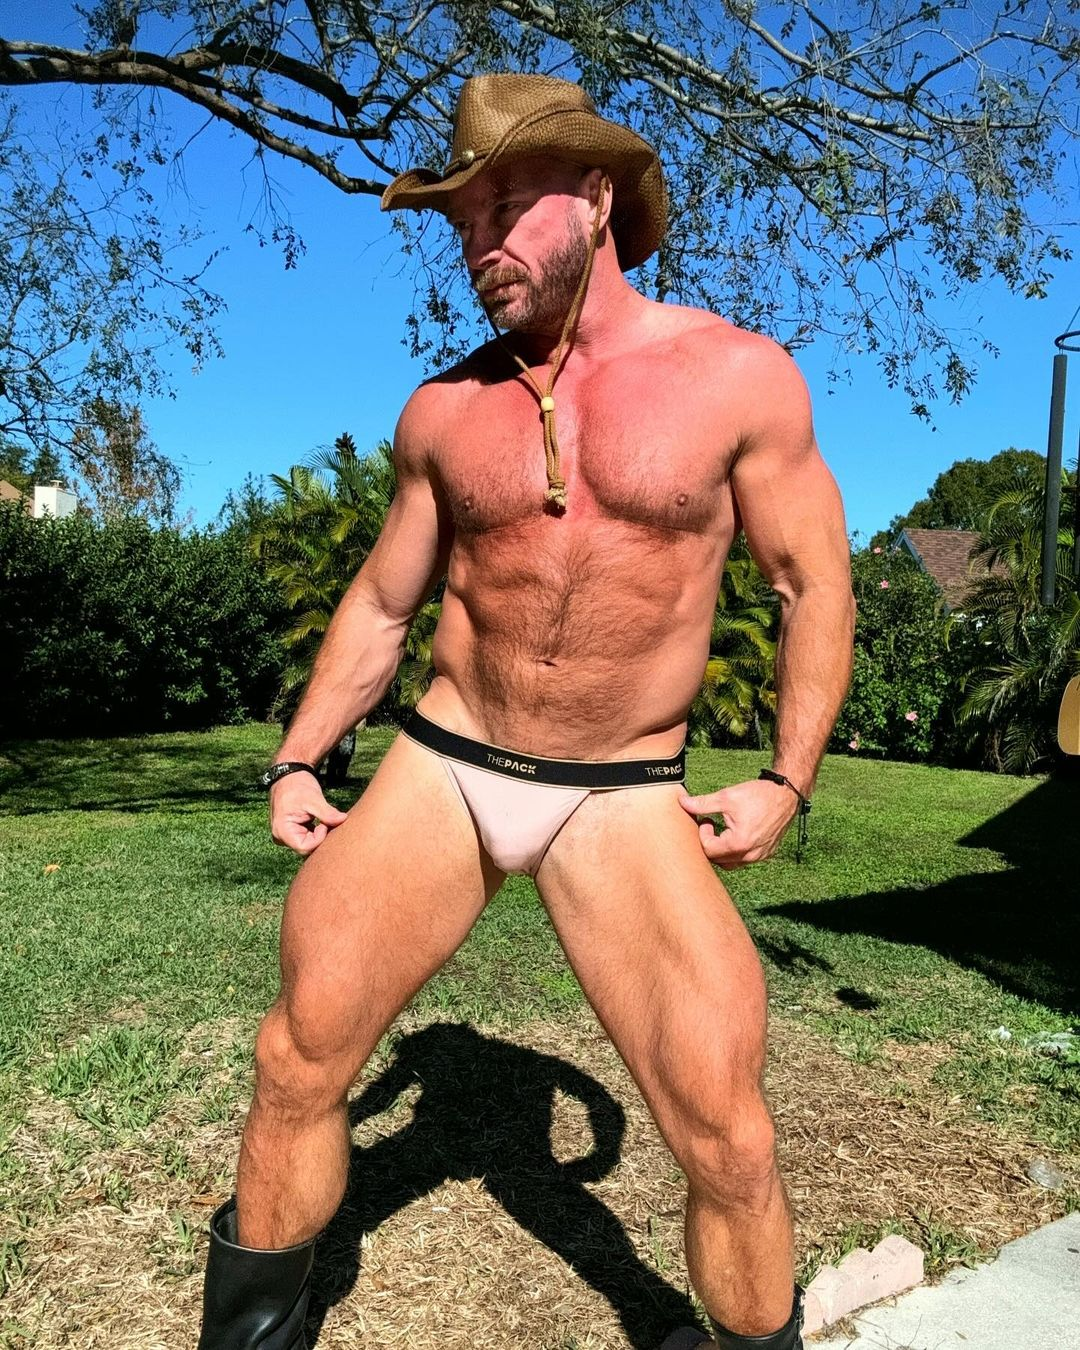 Killian Knox wearing a cowboy hat and cowboy boots in a thepack jockstrap looking into the distance on green grass